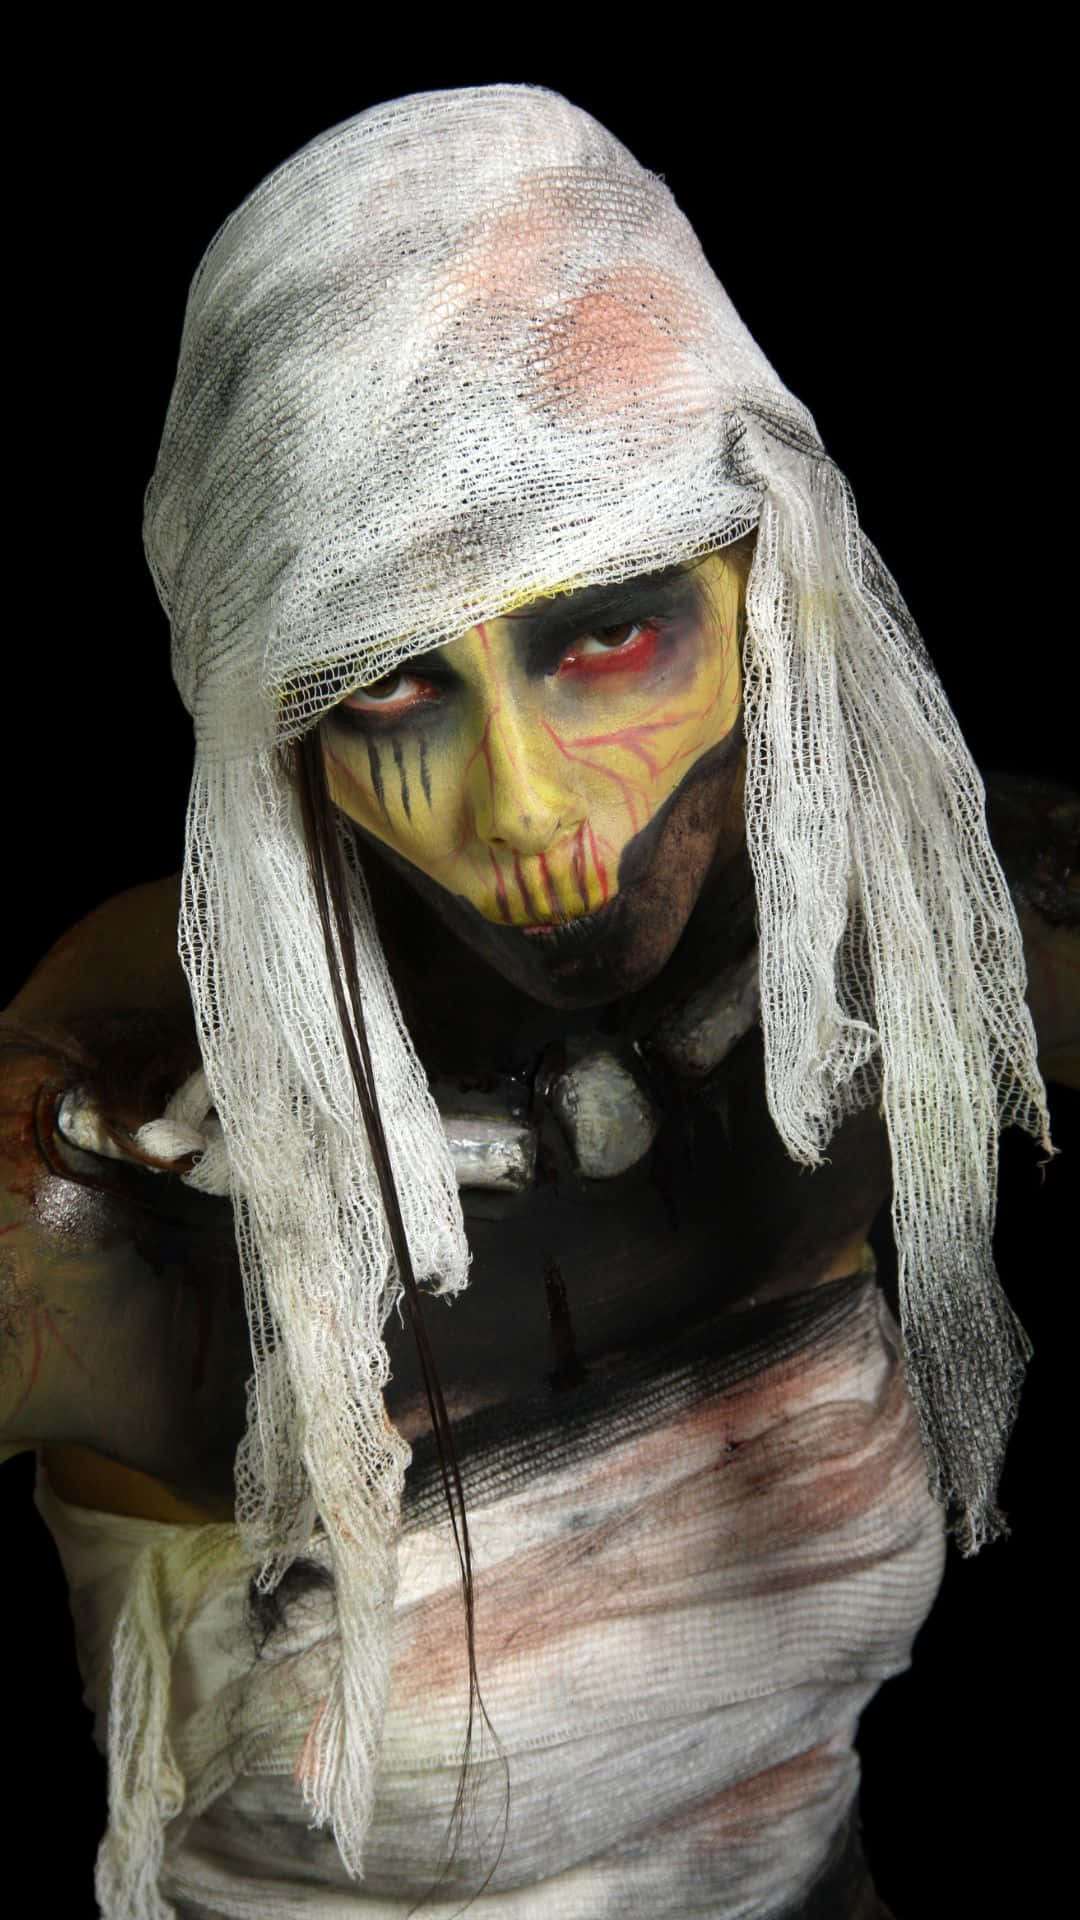 Get ready for Halloween in style with one of our amazing mummy costumes! Wallpaper